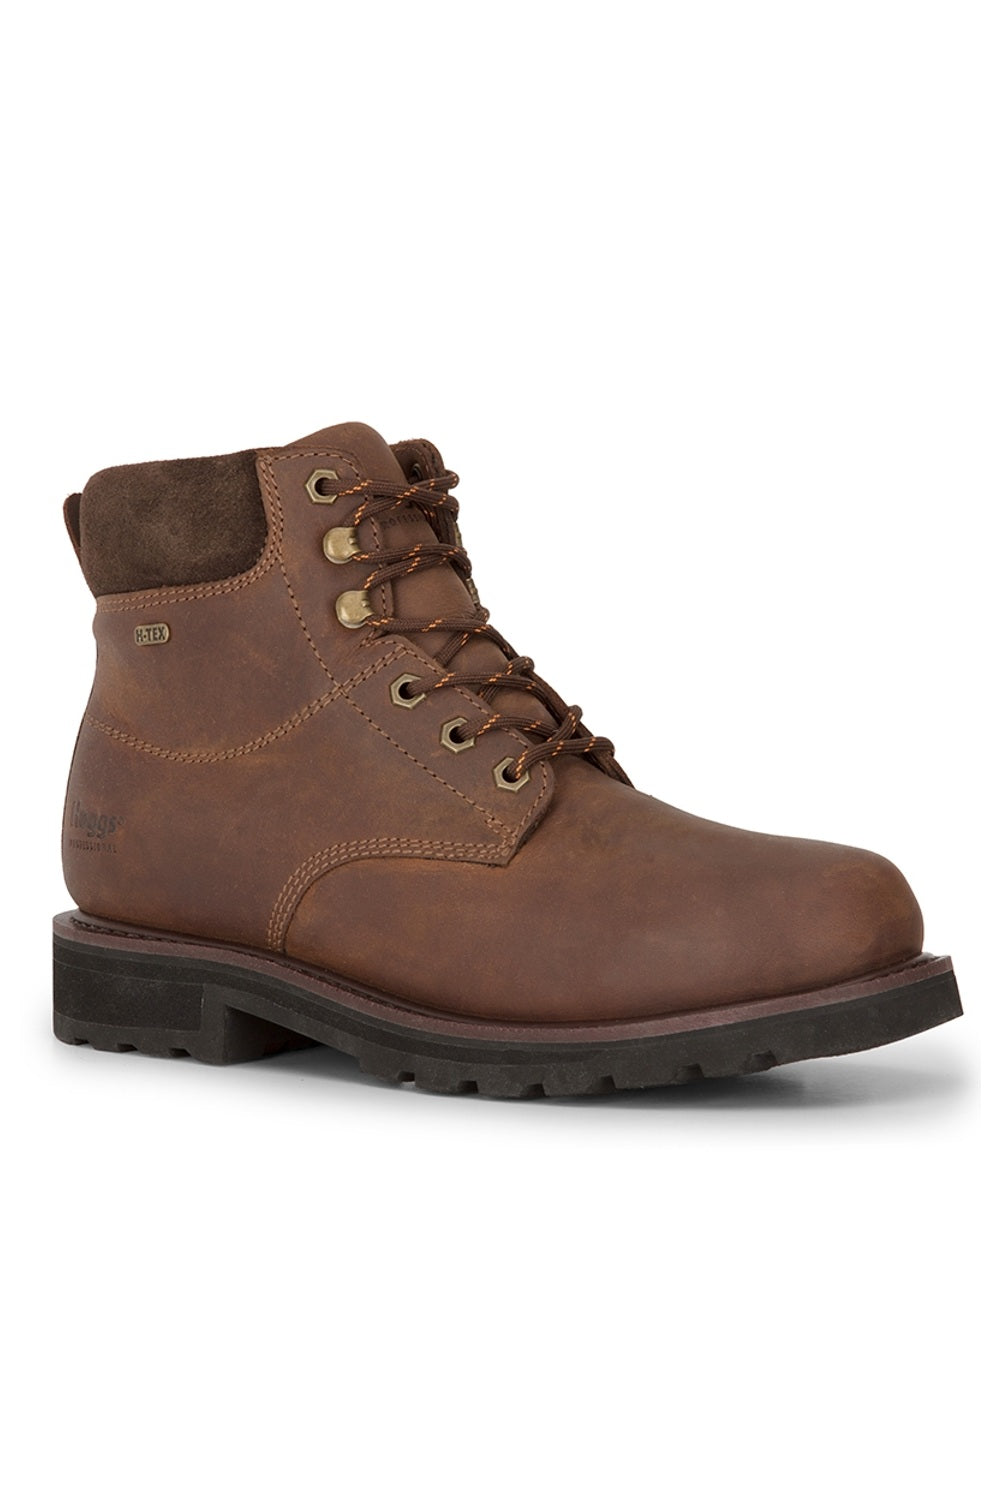 Hoggs of Fife Cronos Pro Boot in Crazy Horse Brown